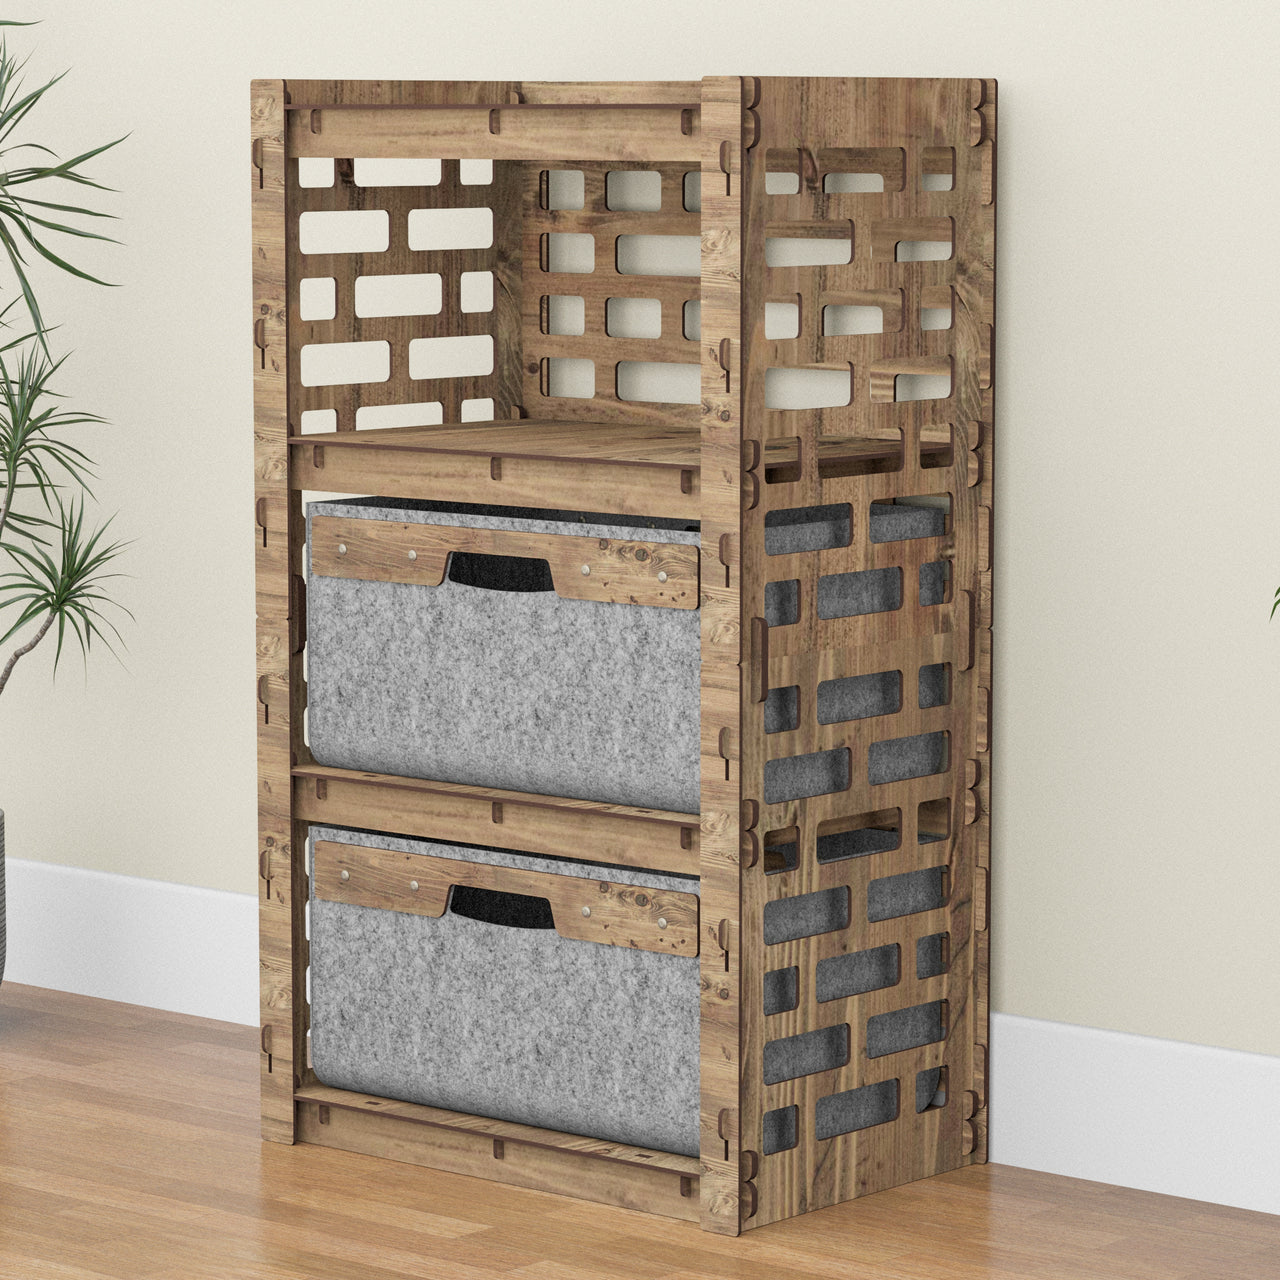 Brickwall Chest Of 2 Drawers Storage Cabinet [2 LARGE GRAY BINS]